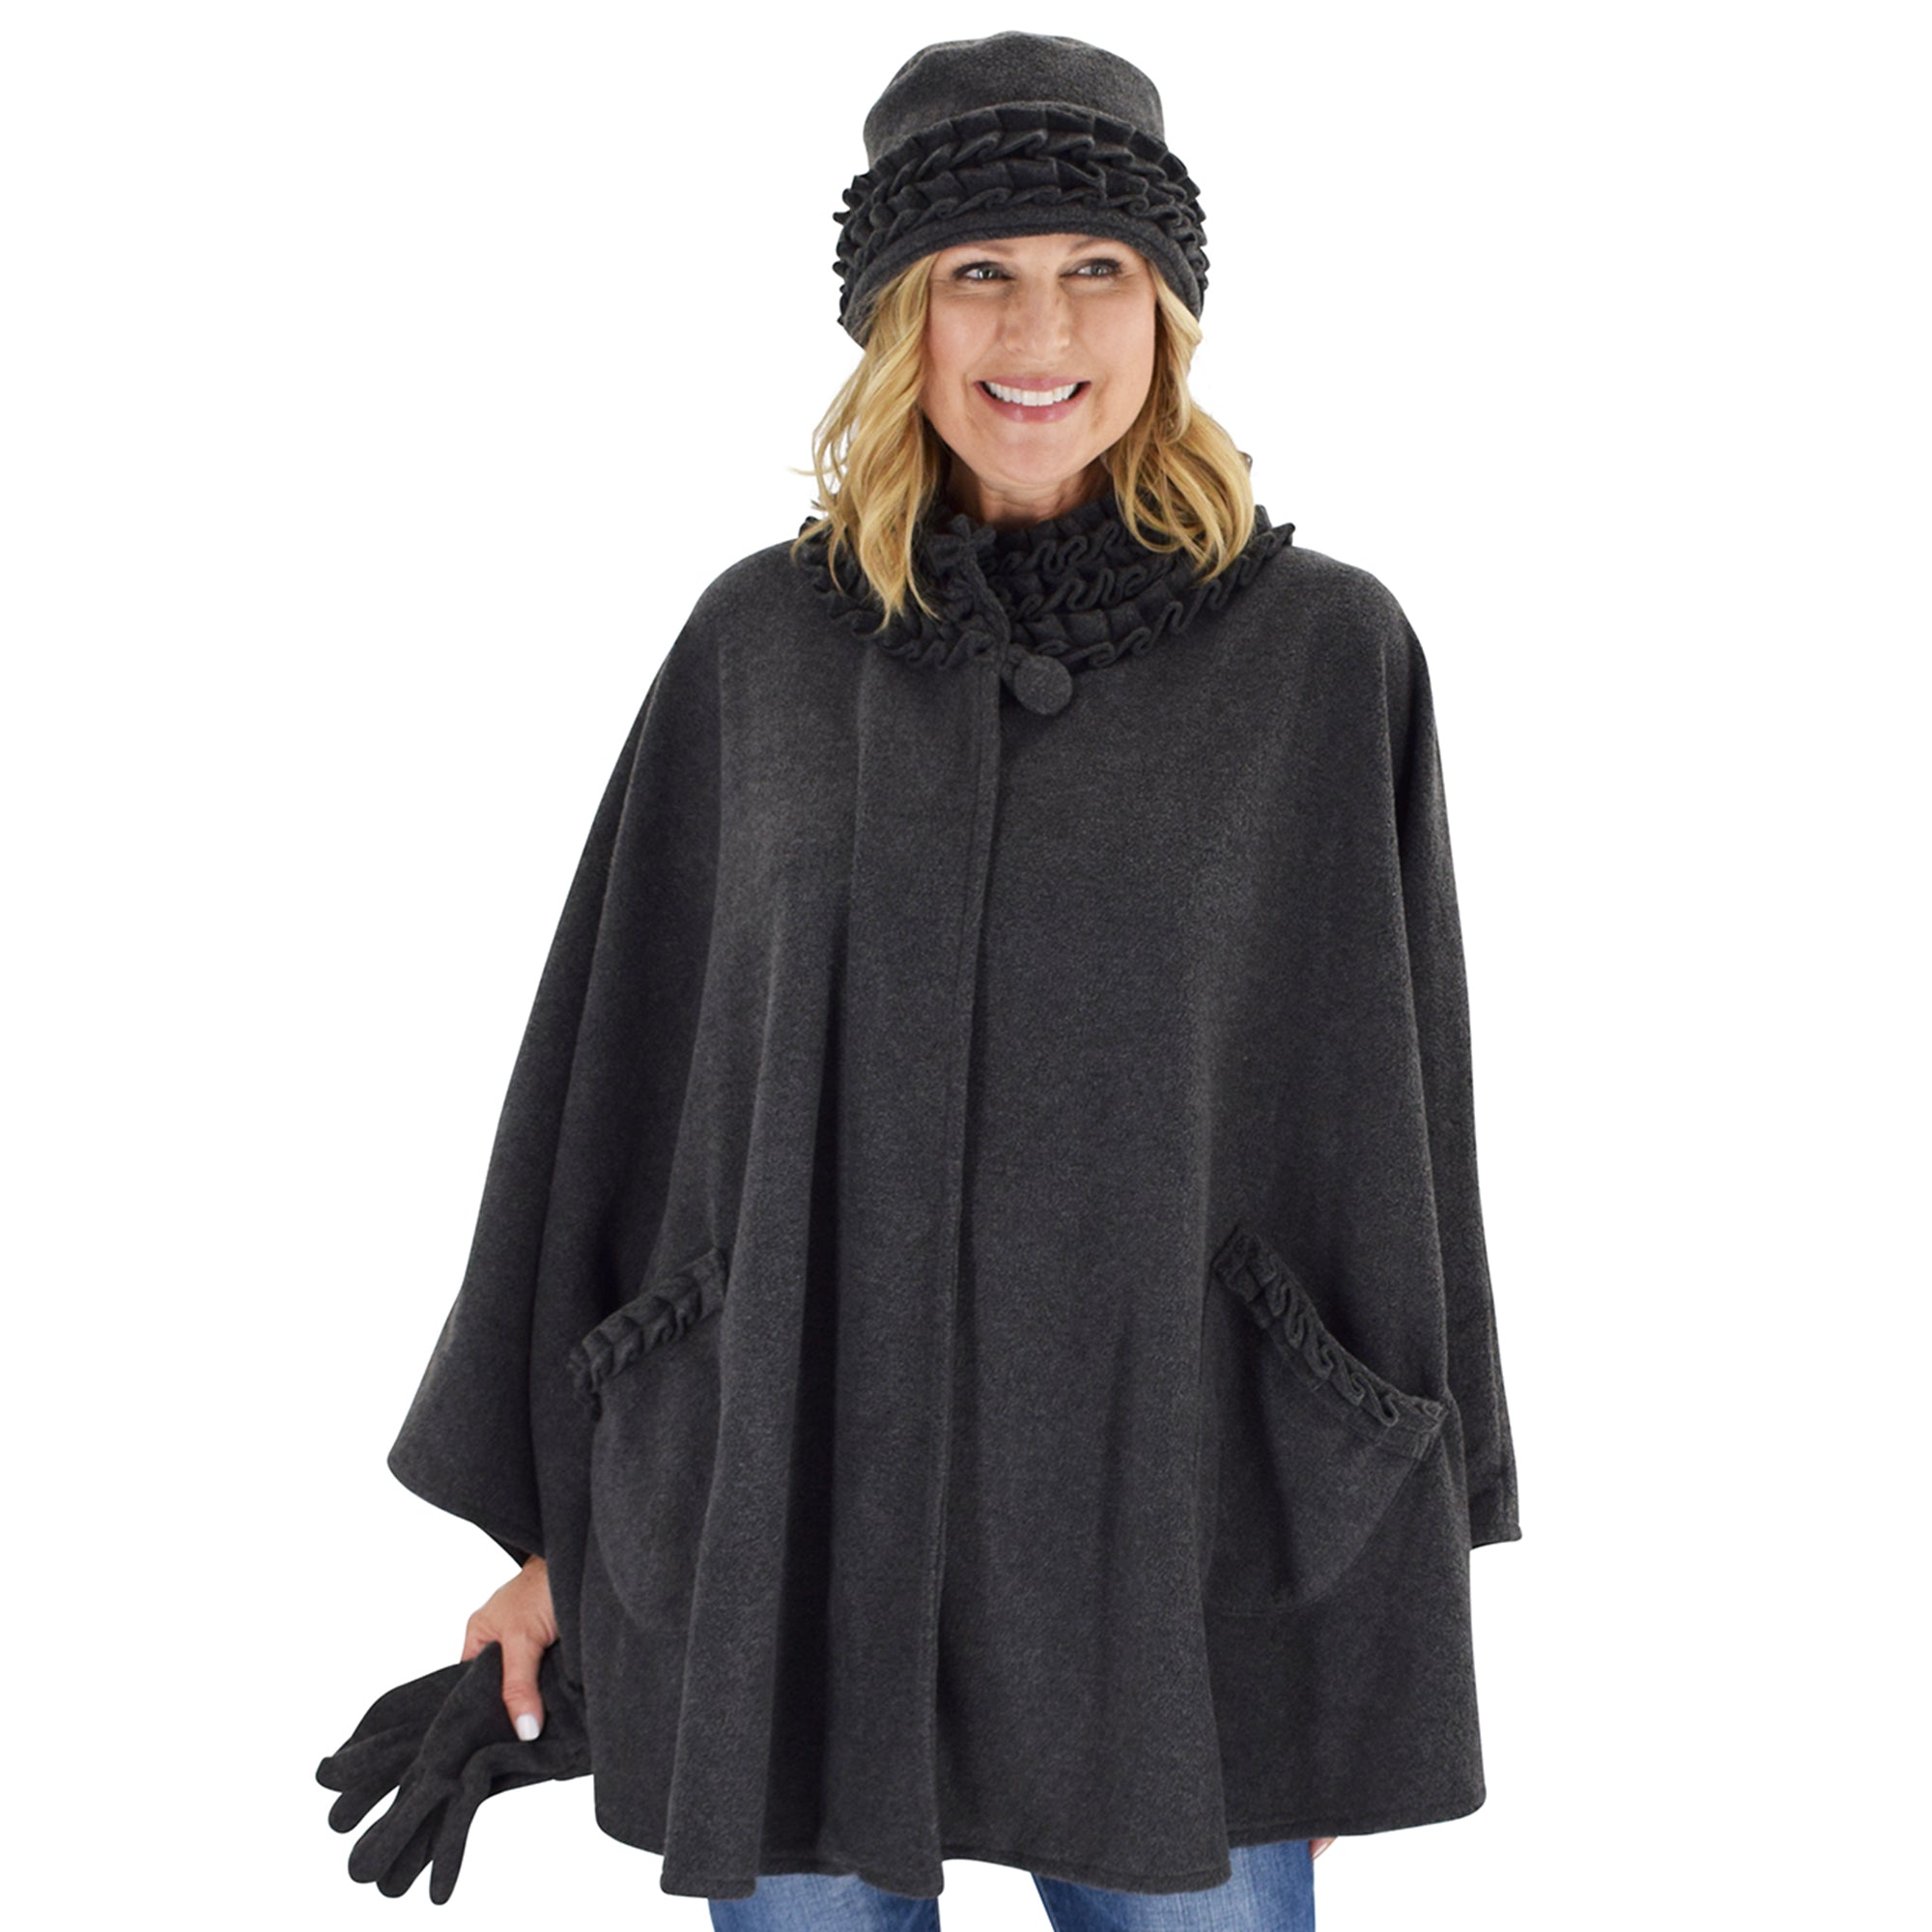 Le Moda Women's Ruffed collar Fleece Wrap with Matching Gloves and Hat - One Size Fits All at Linda Anderson. color_grey